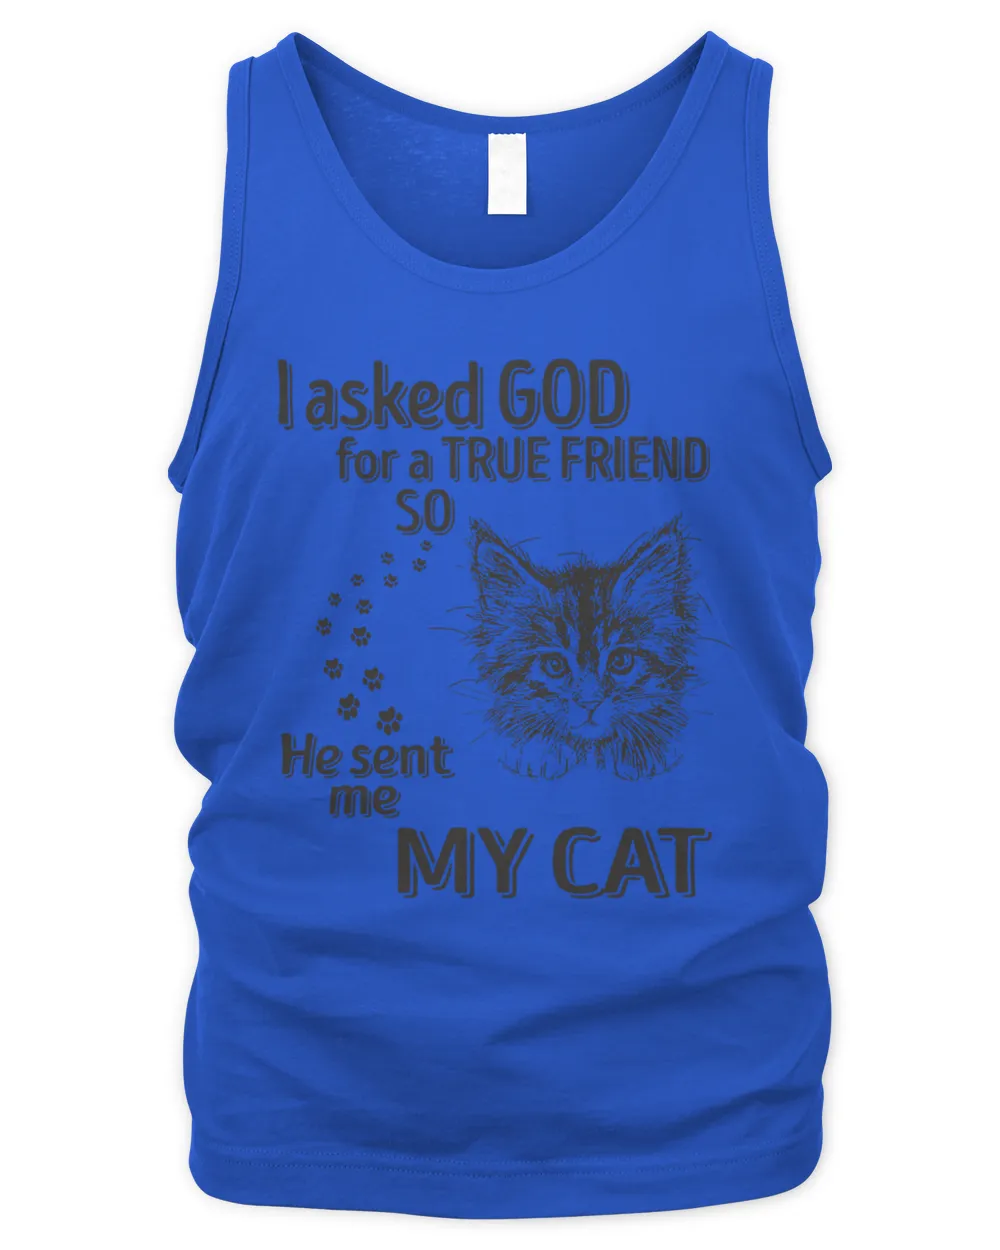 I asked god for a true friend so he sent me my cat